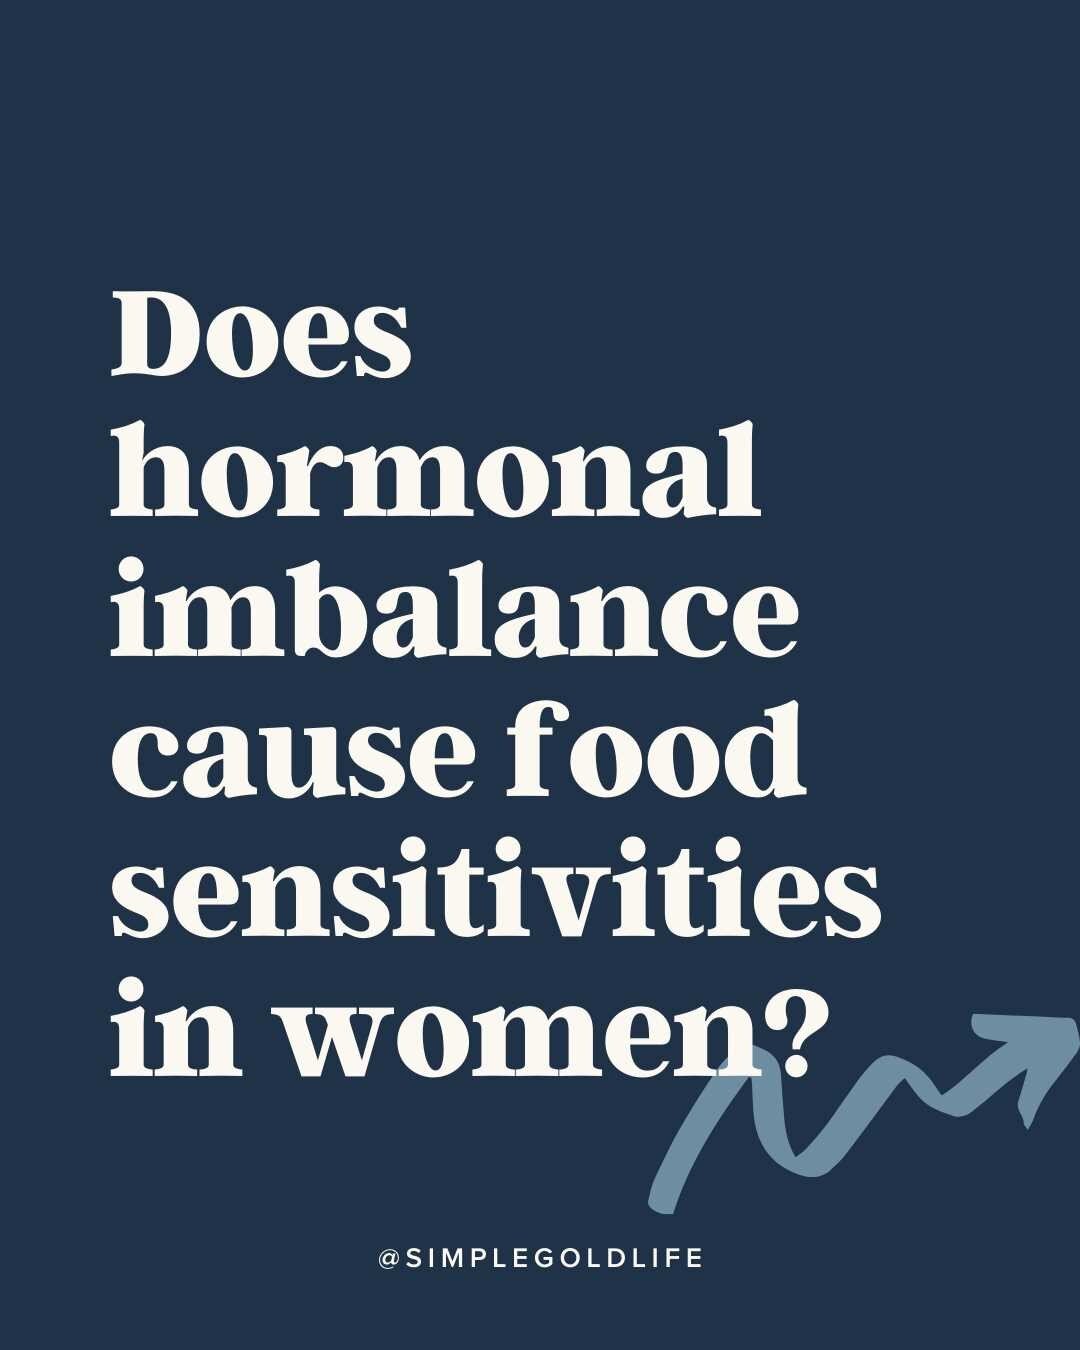 Ladies, your hormones may be the reason why you have new food intolerances! 😟

Food intolerance is difficulty digesting certain foods and having an unpleasant physical reaction to them. It causes bloating and tummy pain symptoms, which usually happe